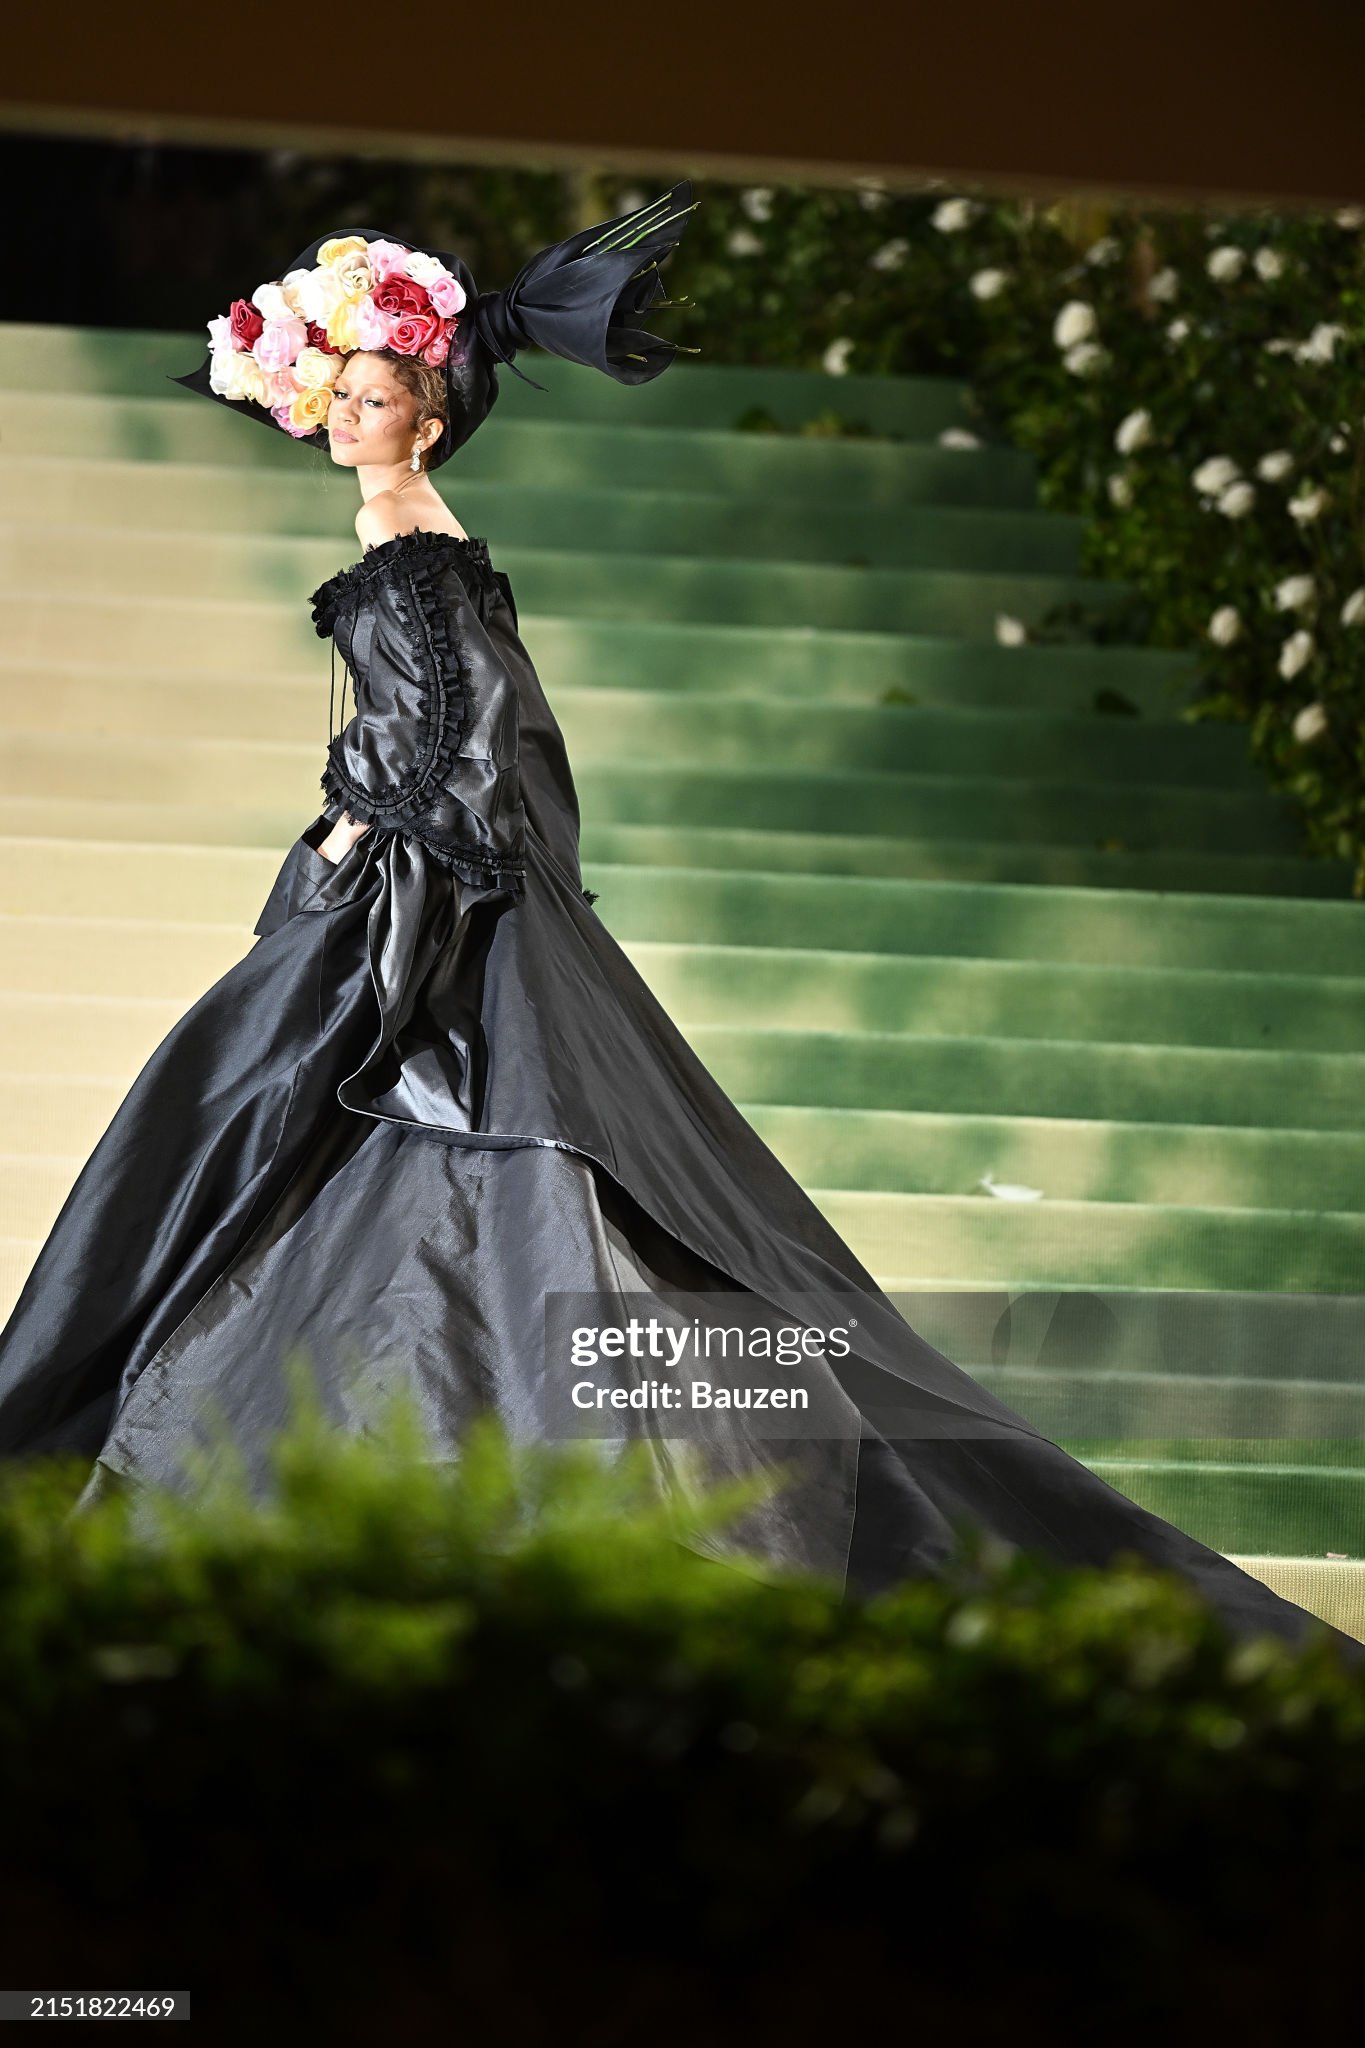 gettyimages-2151822469-2048x2048.jpg